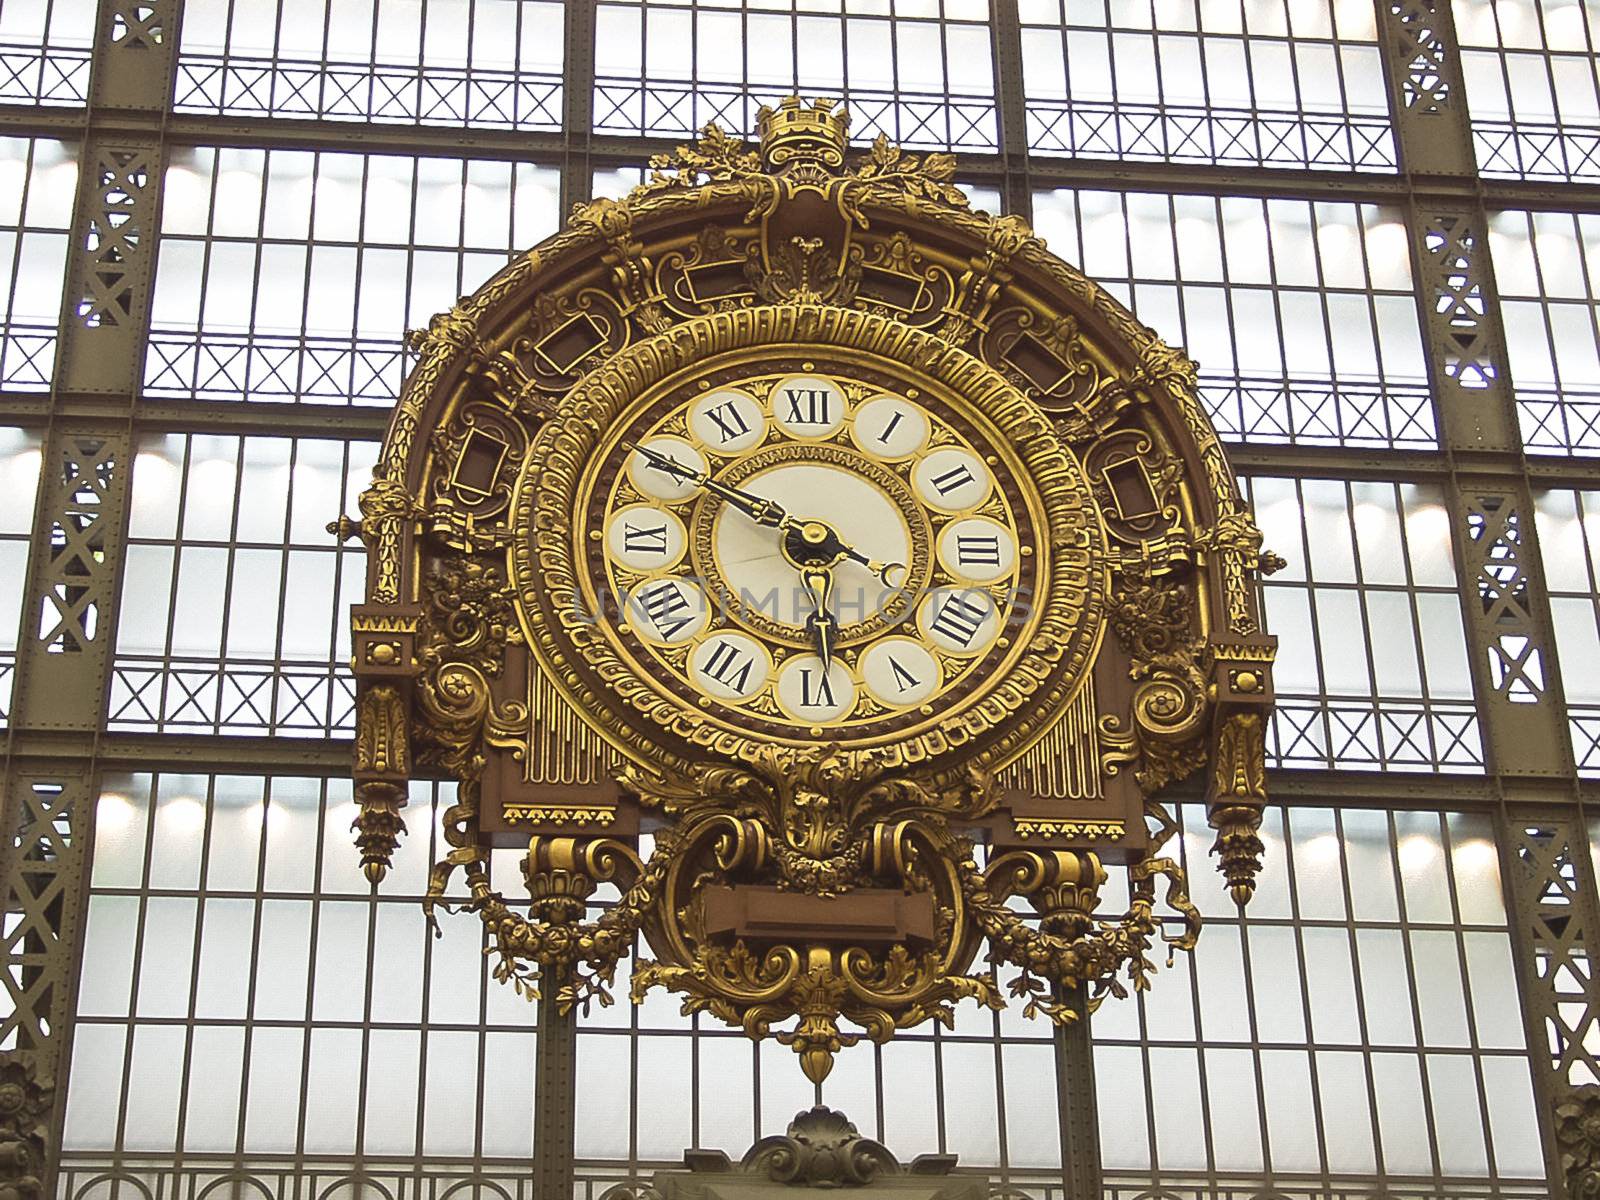 d, Orsay, hours in the museum by NickNick